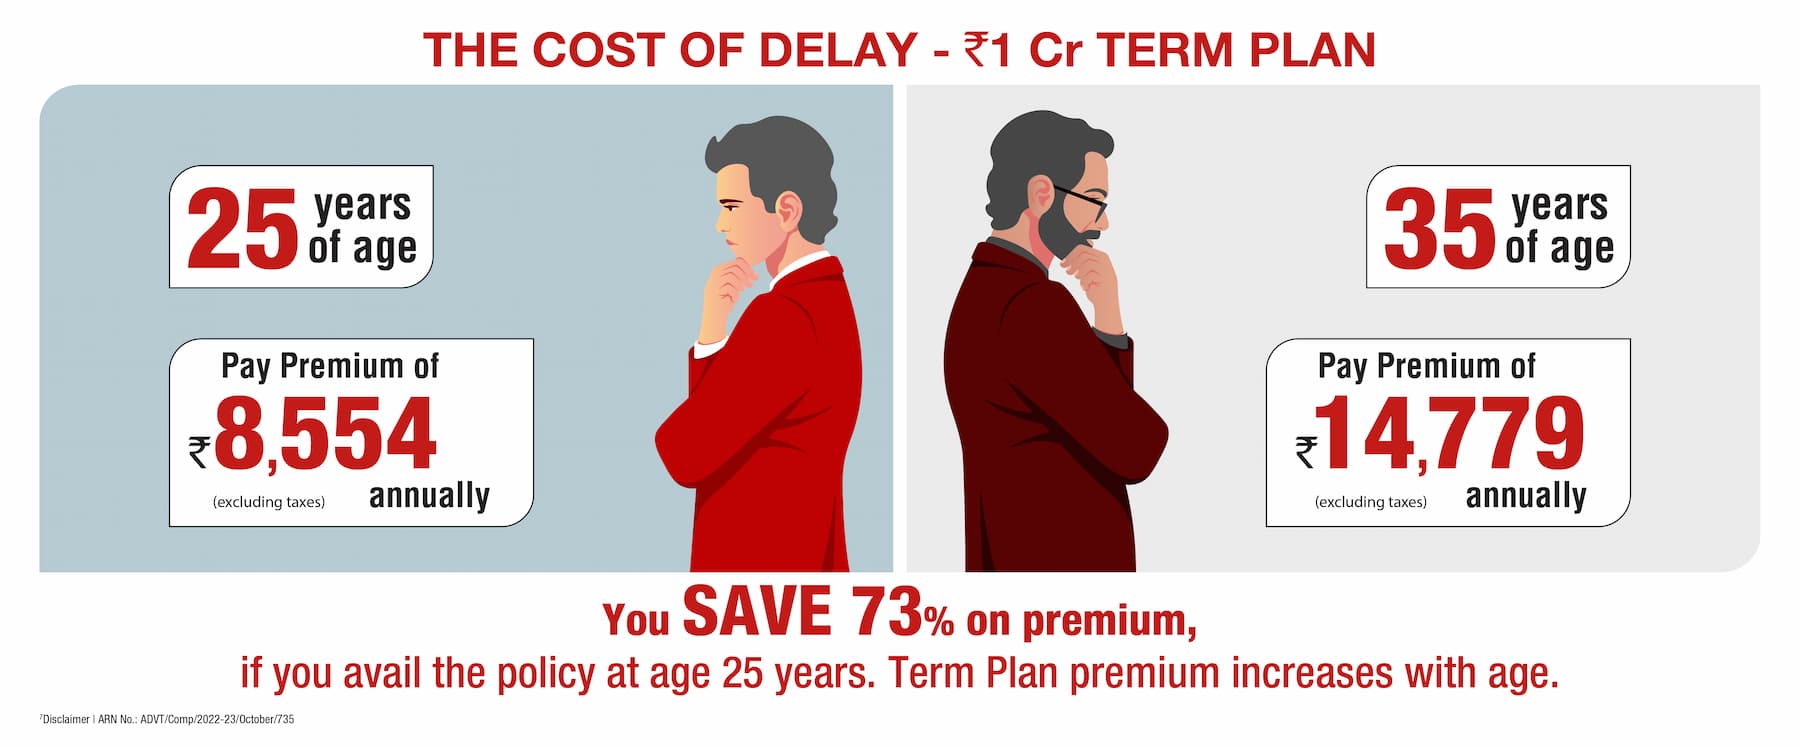 Term plan premium cost comparison when delayed by few years